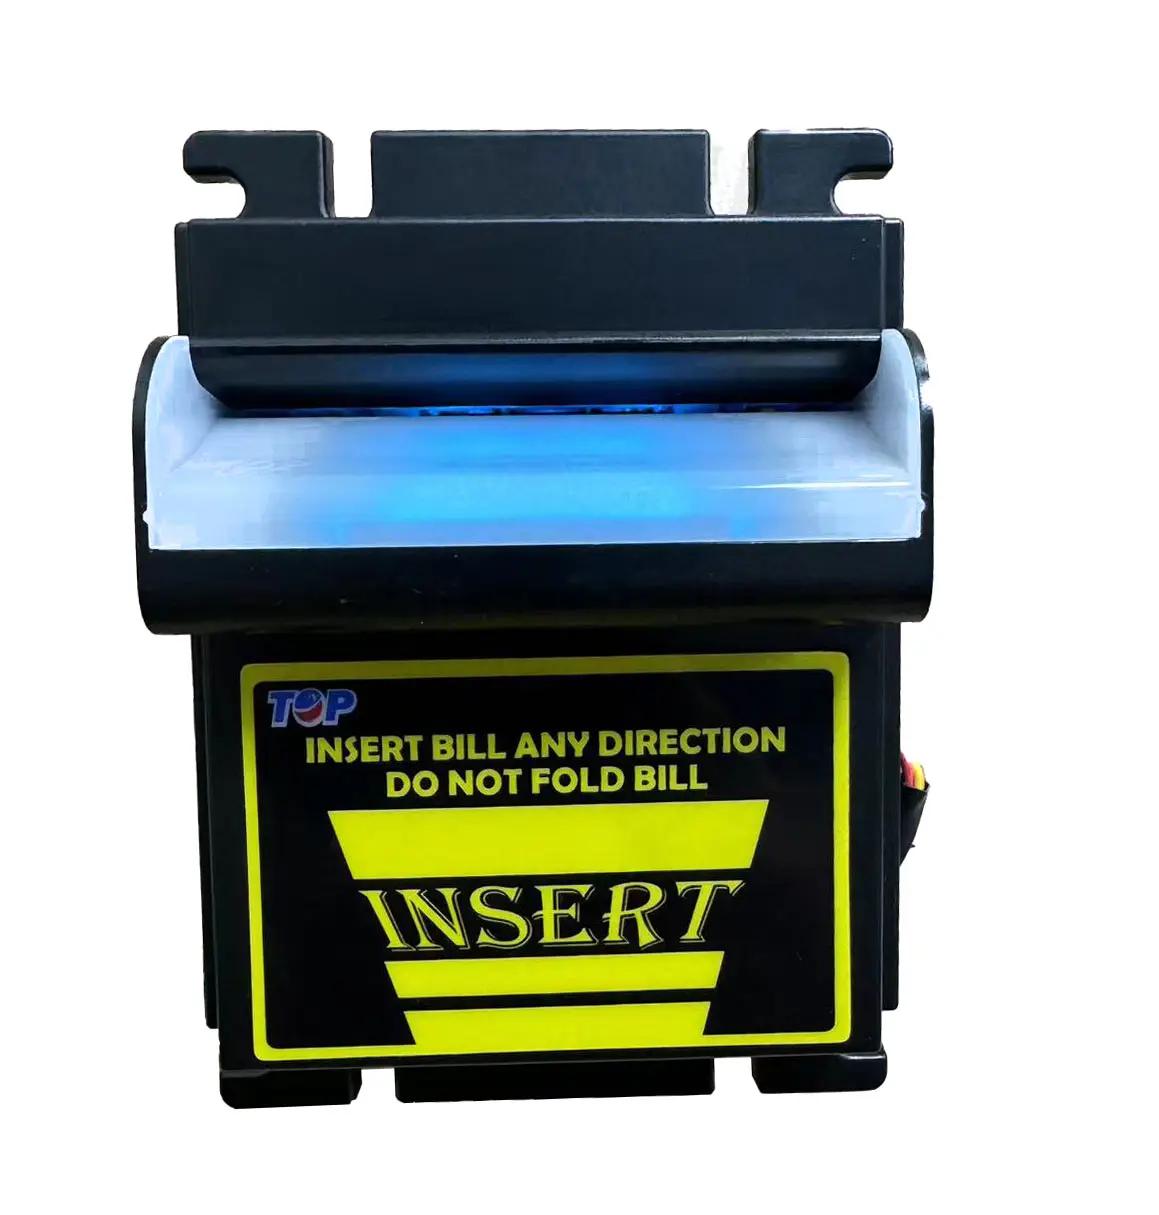 Top TB74 Bill Acceptor for Coin Operated Games